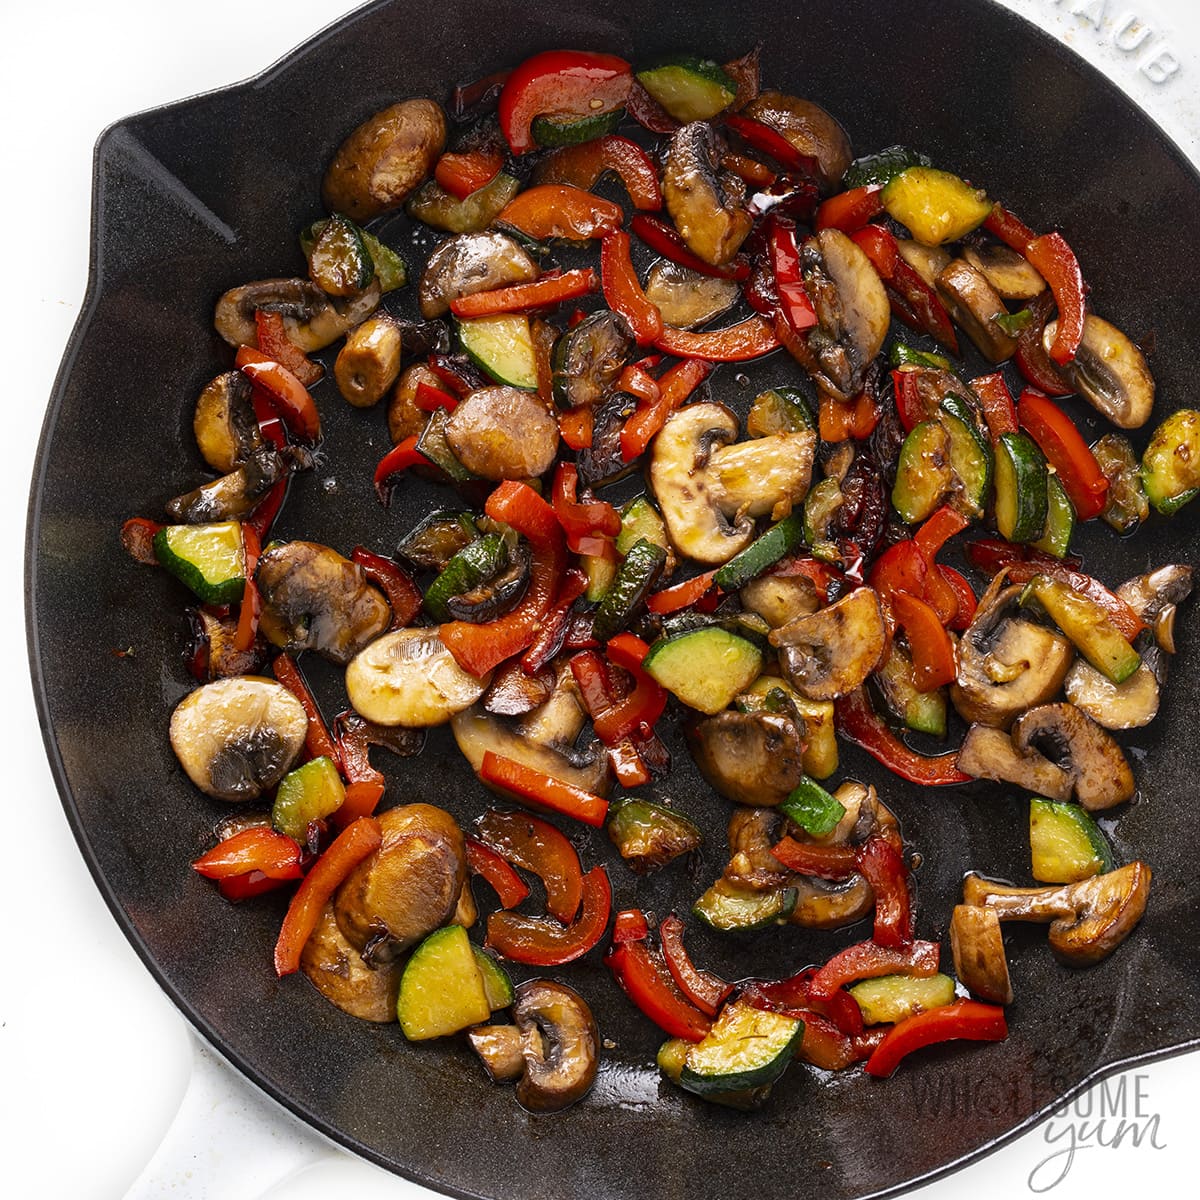 Sauteed veggies in a skillet.